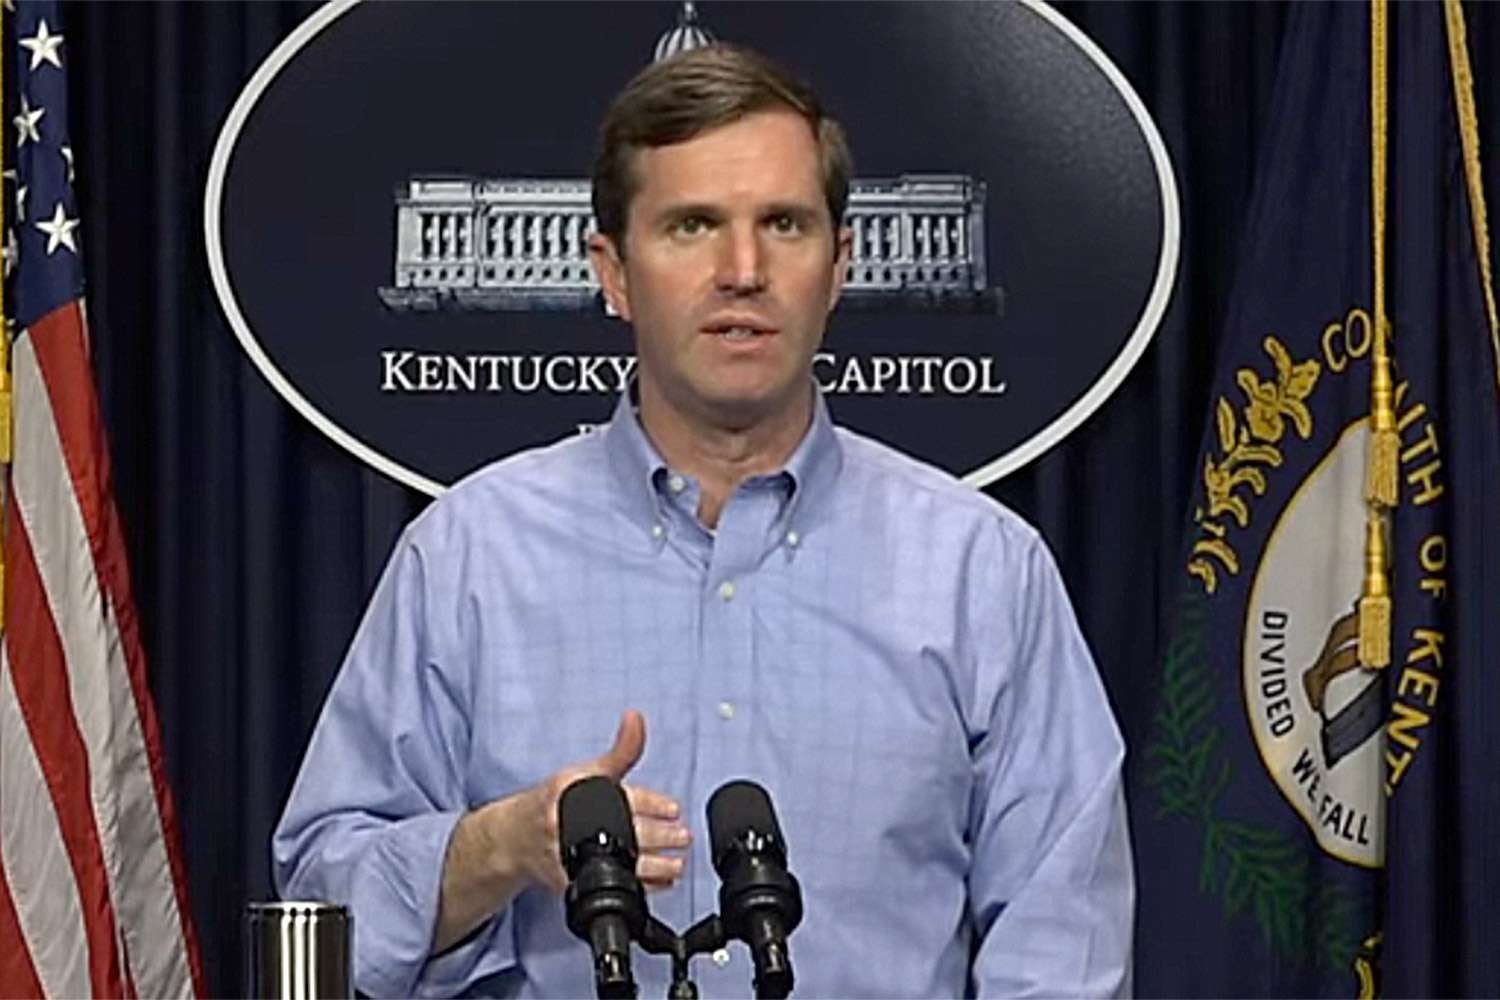 The Serious Side - part 8 Image?url=https%3A%2F%2Fstatic.onecms.io%2Fwp-content%2Fuploads%2Fsites%2F20%2F2020%2F03%2F25%2Fandy-beshear